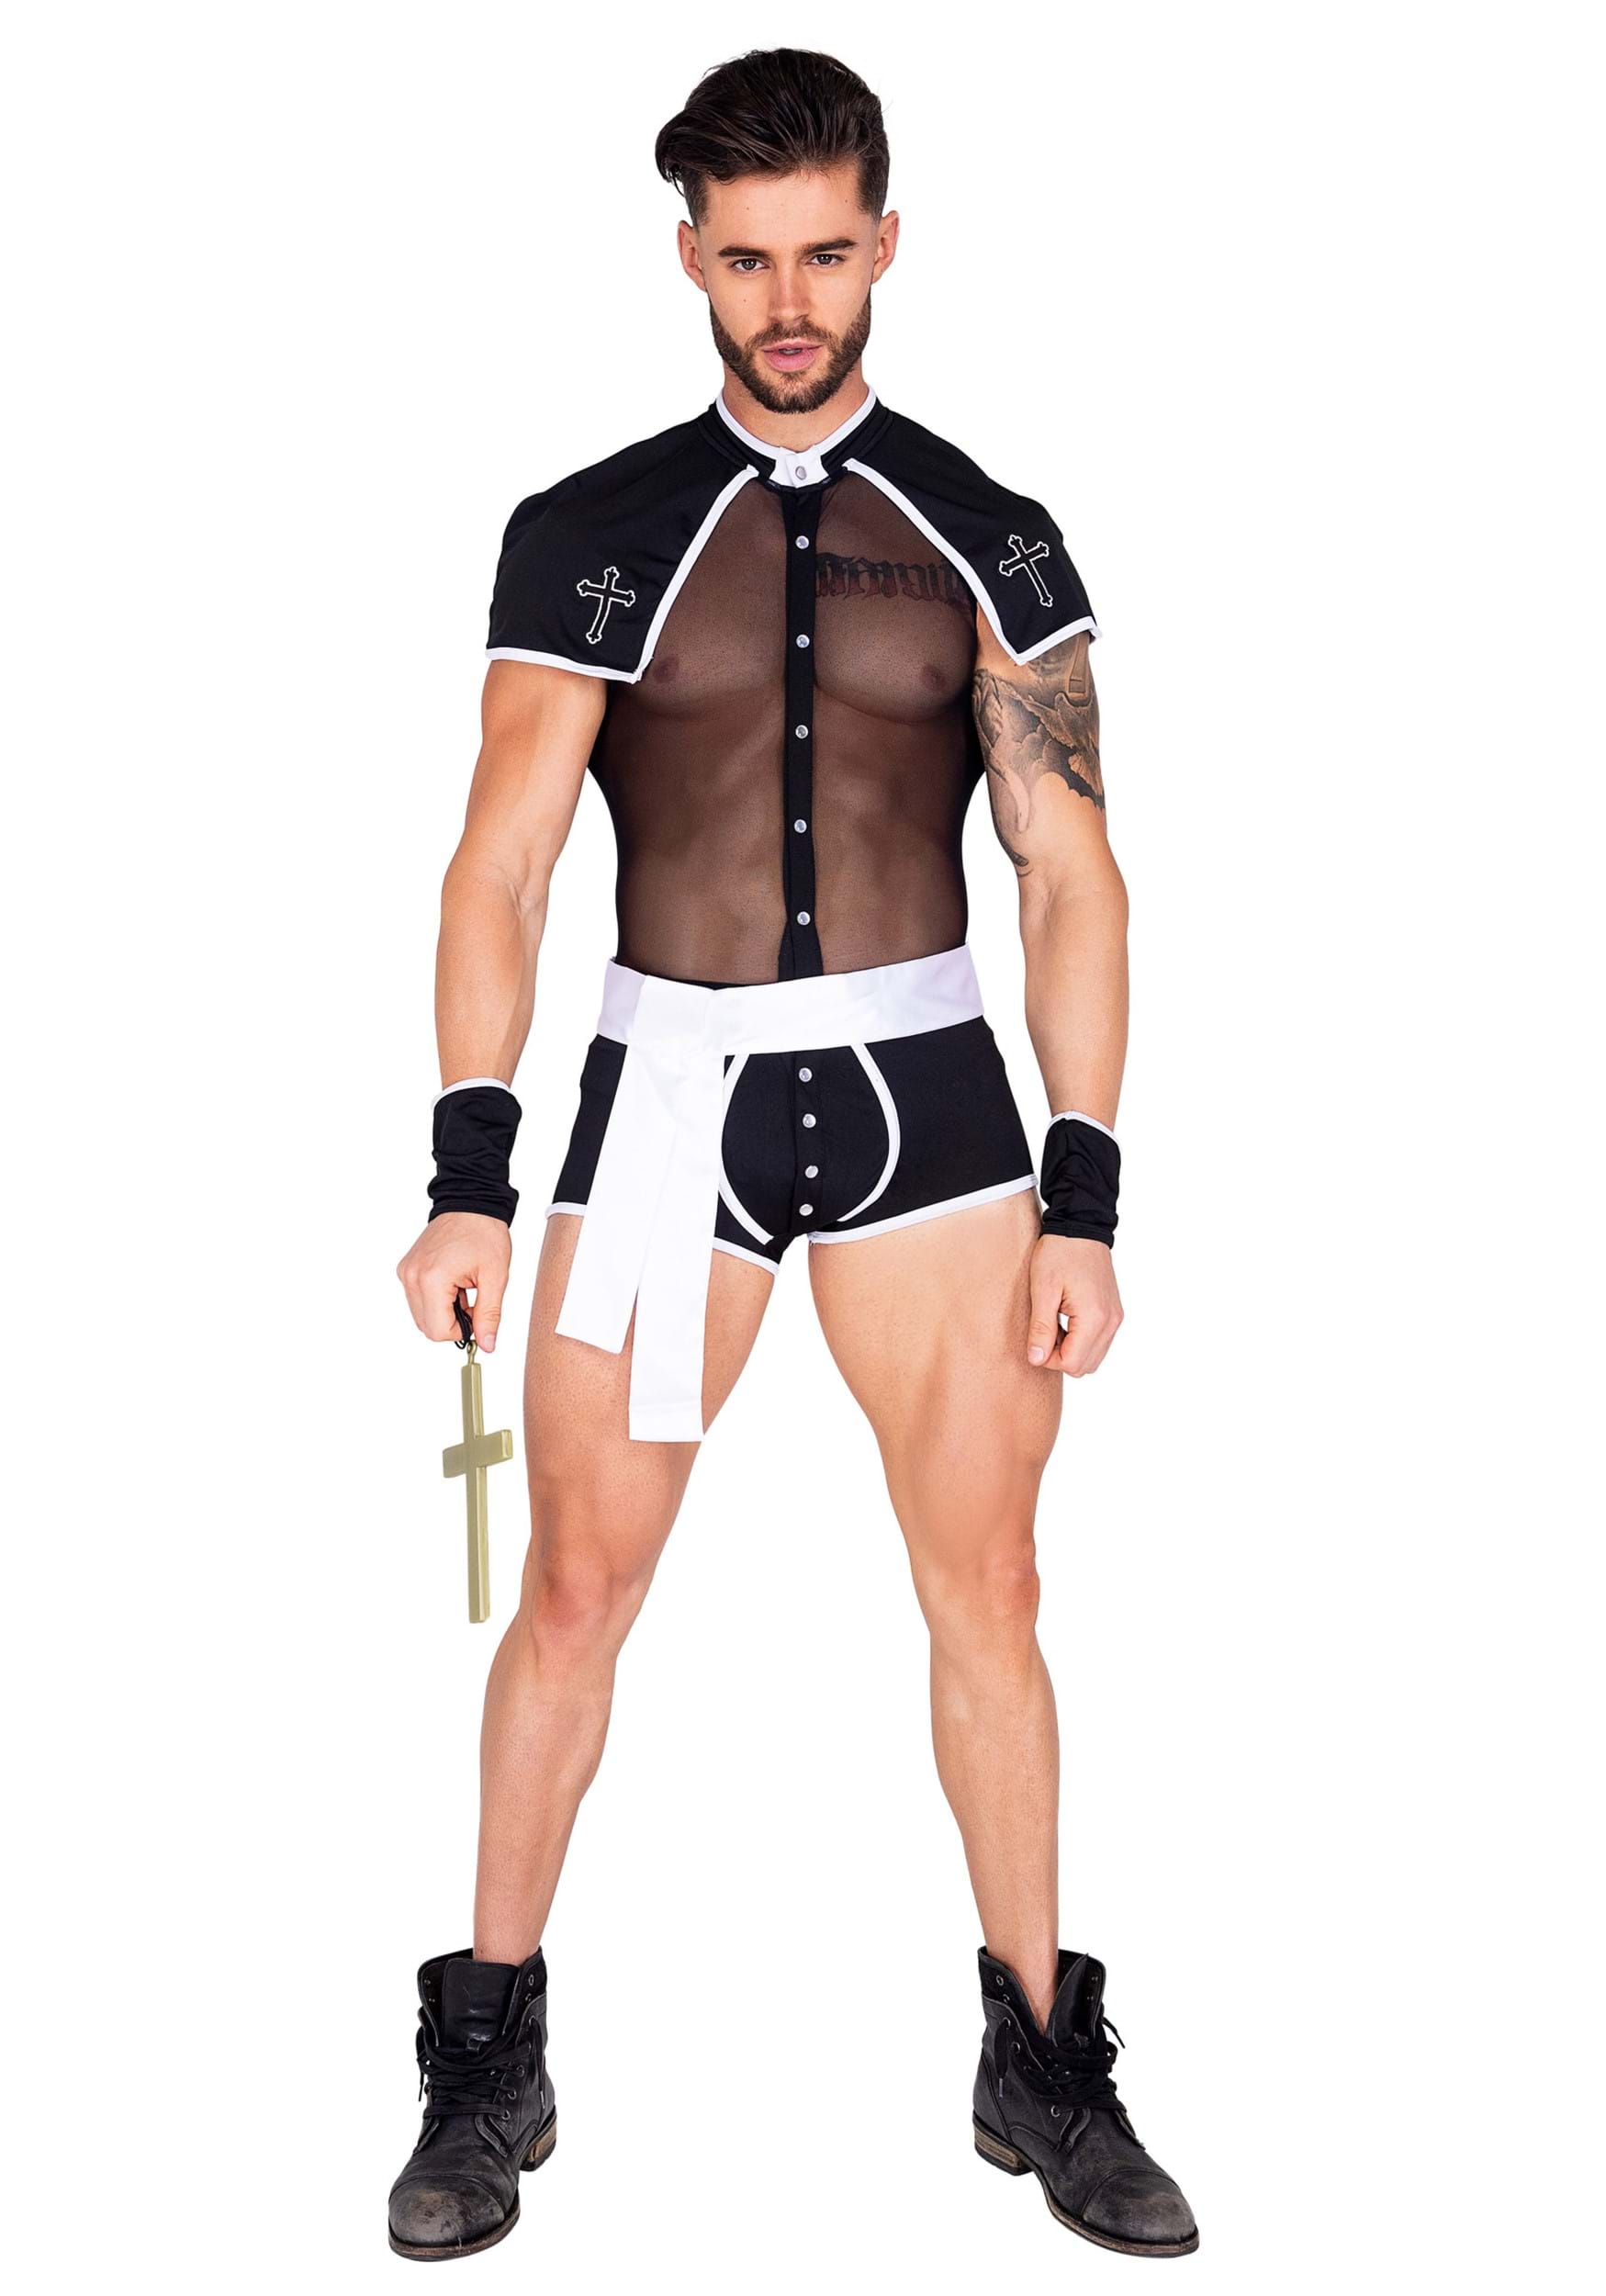 Photos - Fancy Dress Roma Sexy Men's Sinful Confession Costume Black/White RO5029 